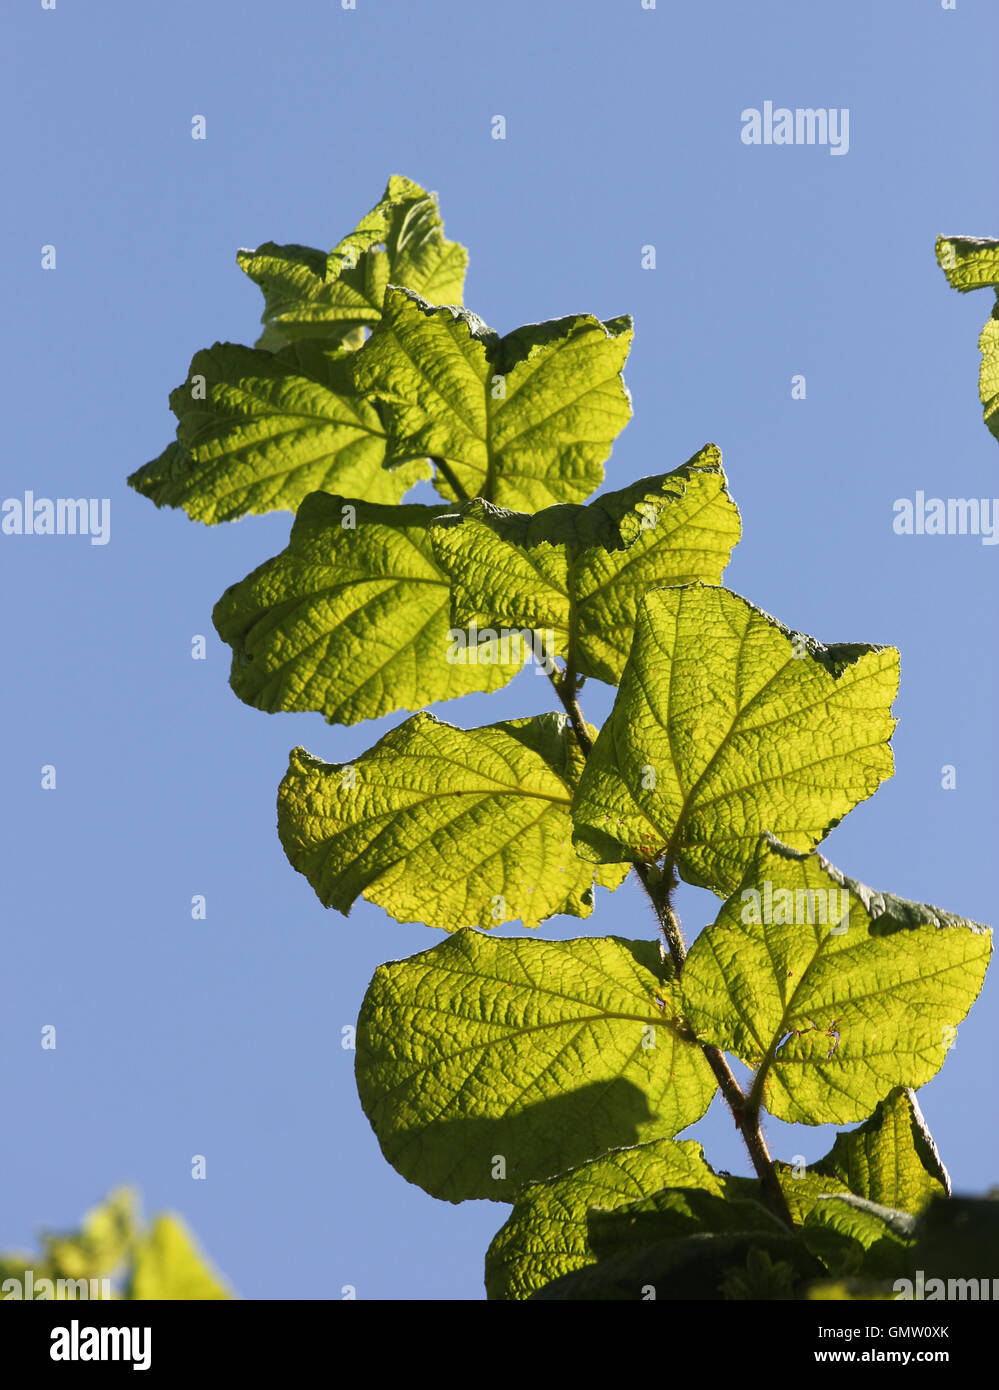 Sunlit common hazel (Corylus avellana) branch and leaves seen from below against a blue sky Stock Photo